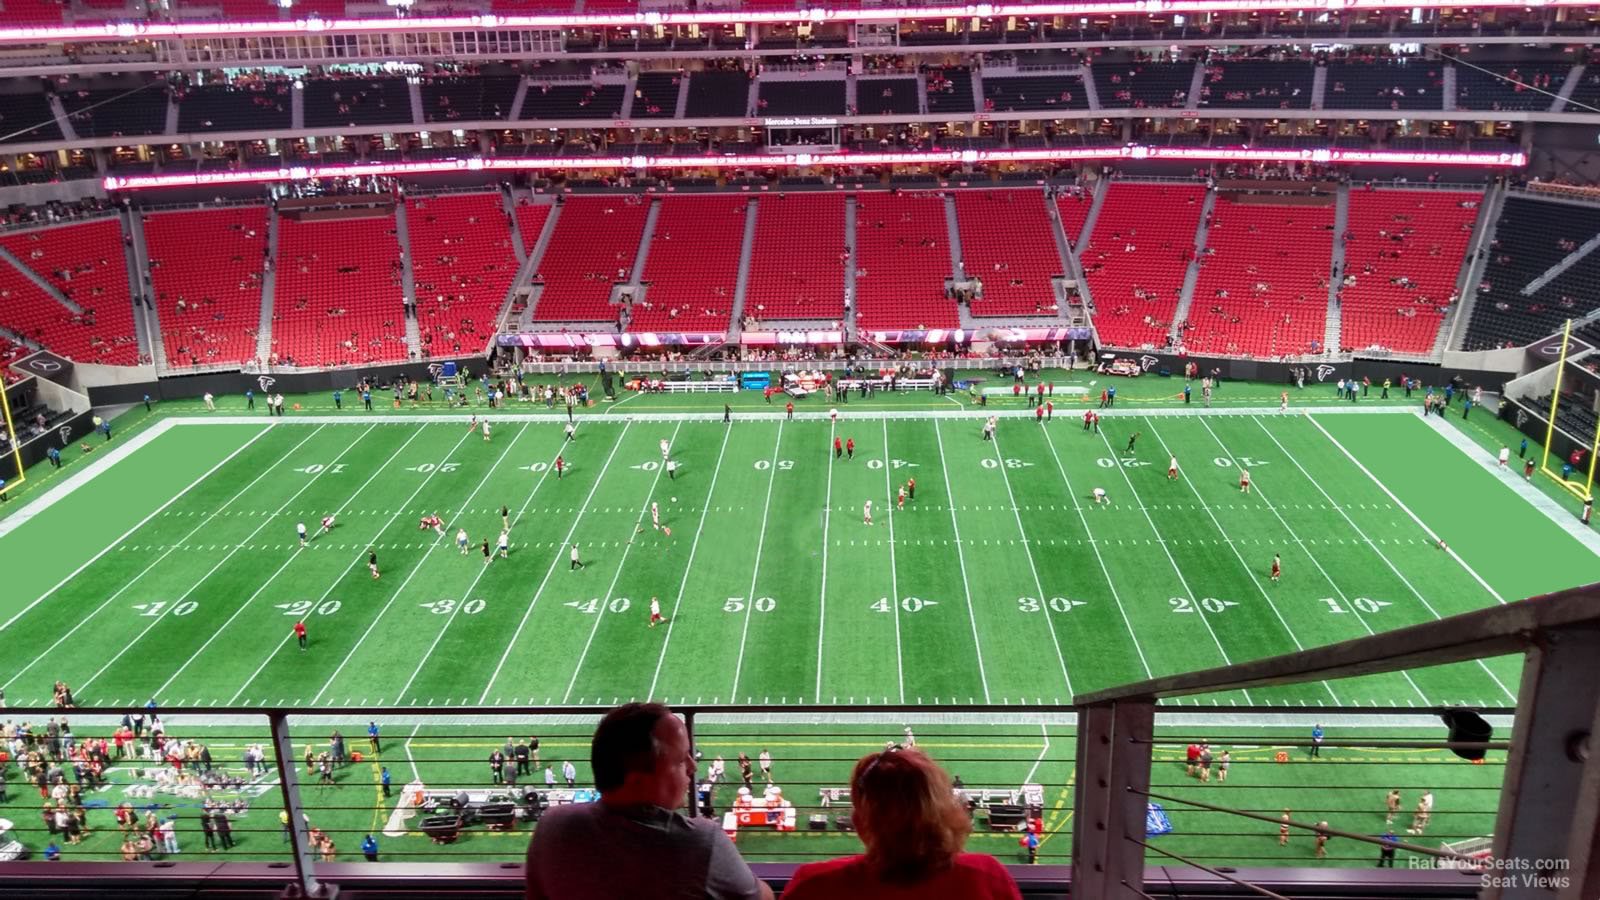 section 311, row 4 seat view  for football - mercedes-benz stadium